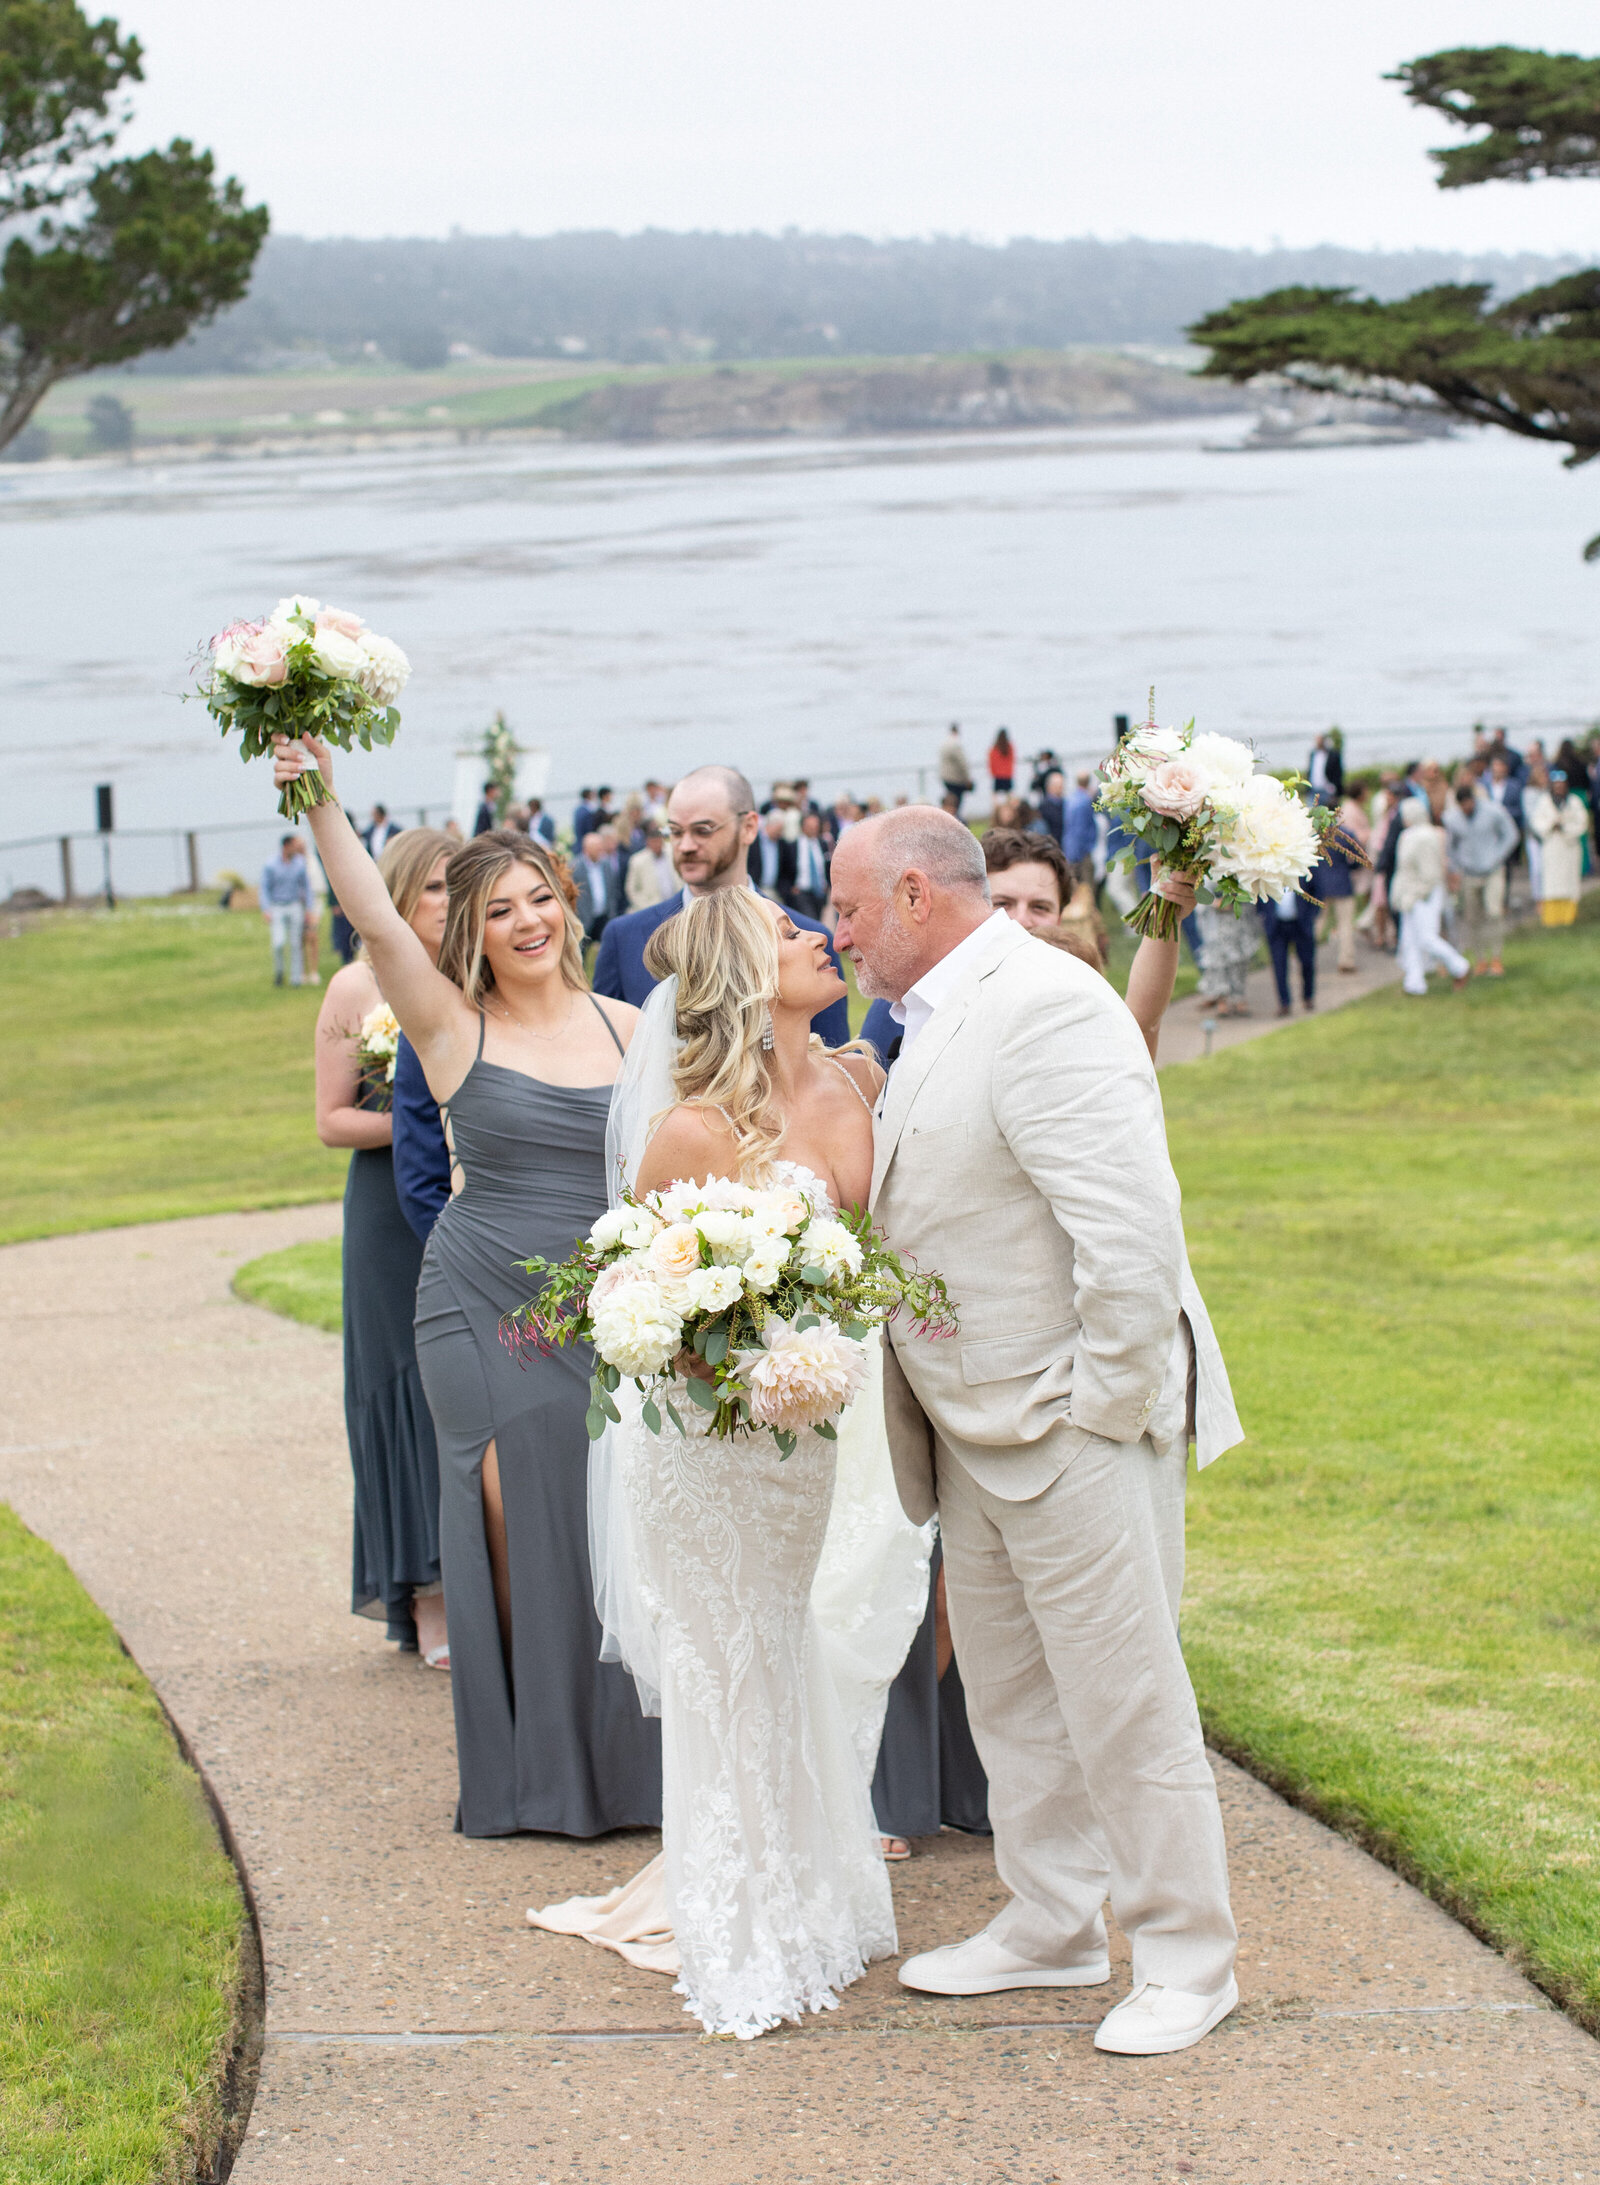 Couple Kissing after Ceremony at Private Home Wedding at Pebble Beach